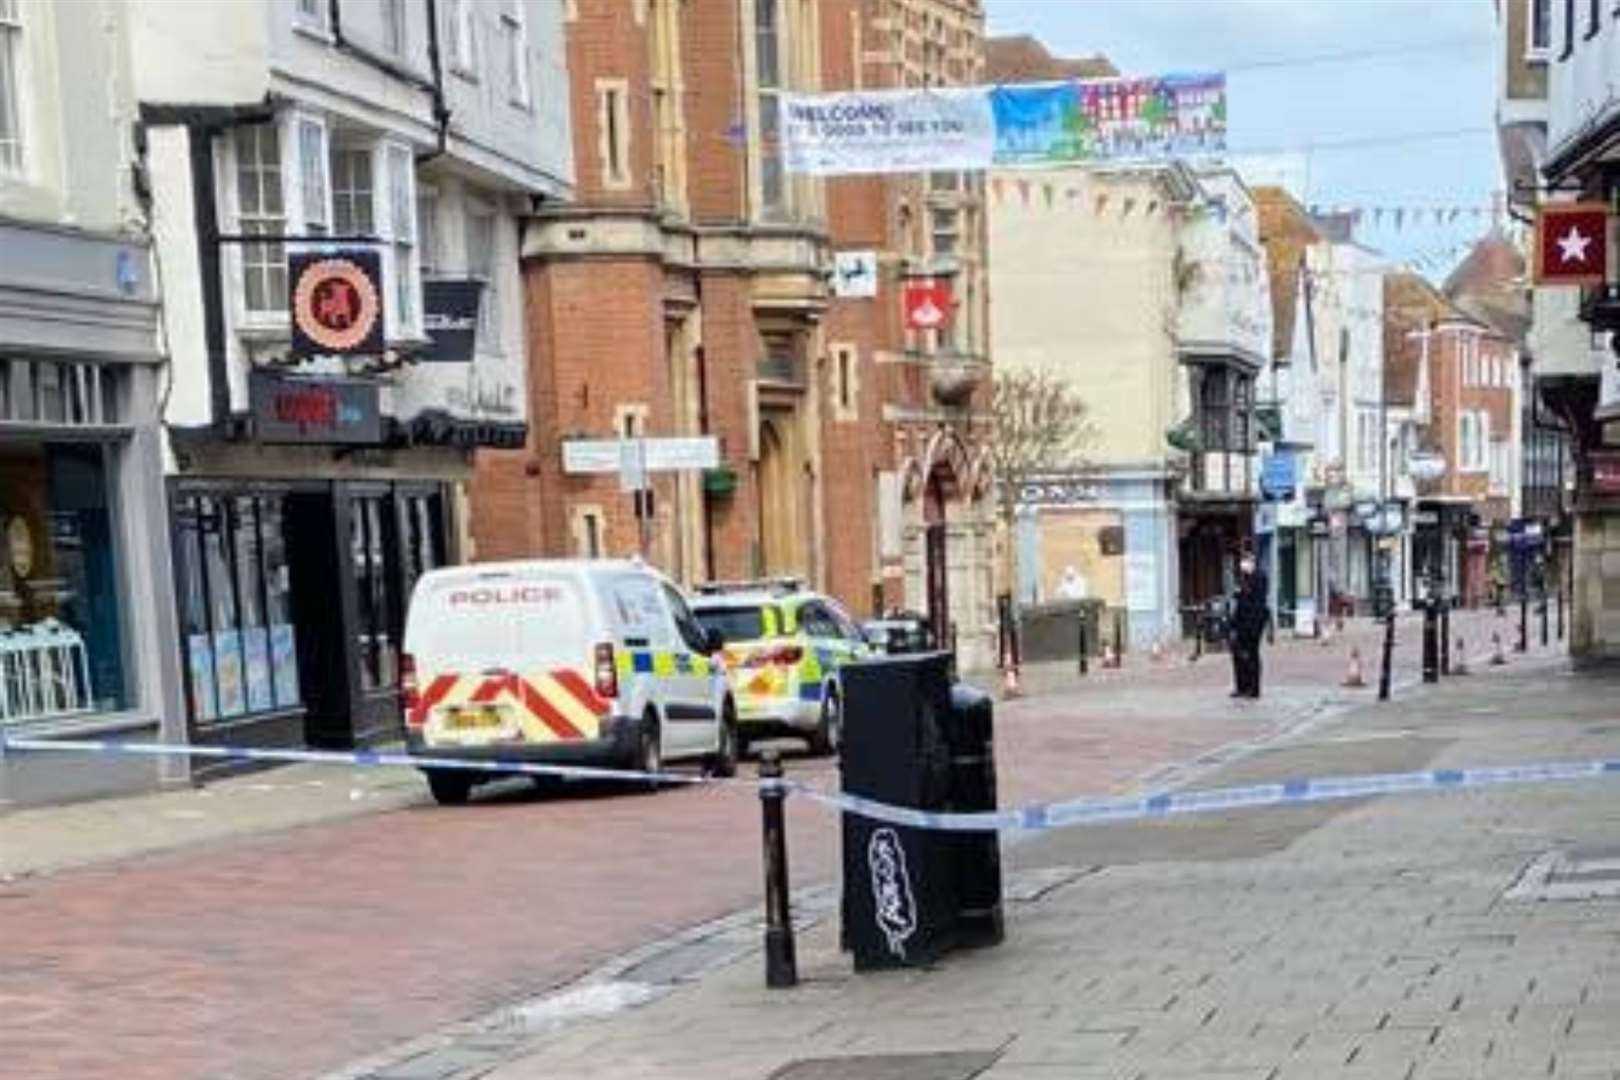 Canterbury High Street was taped off by police. Picture: Nick Sackett